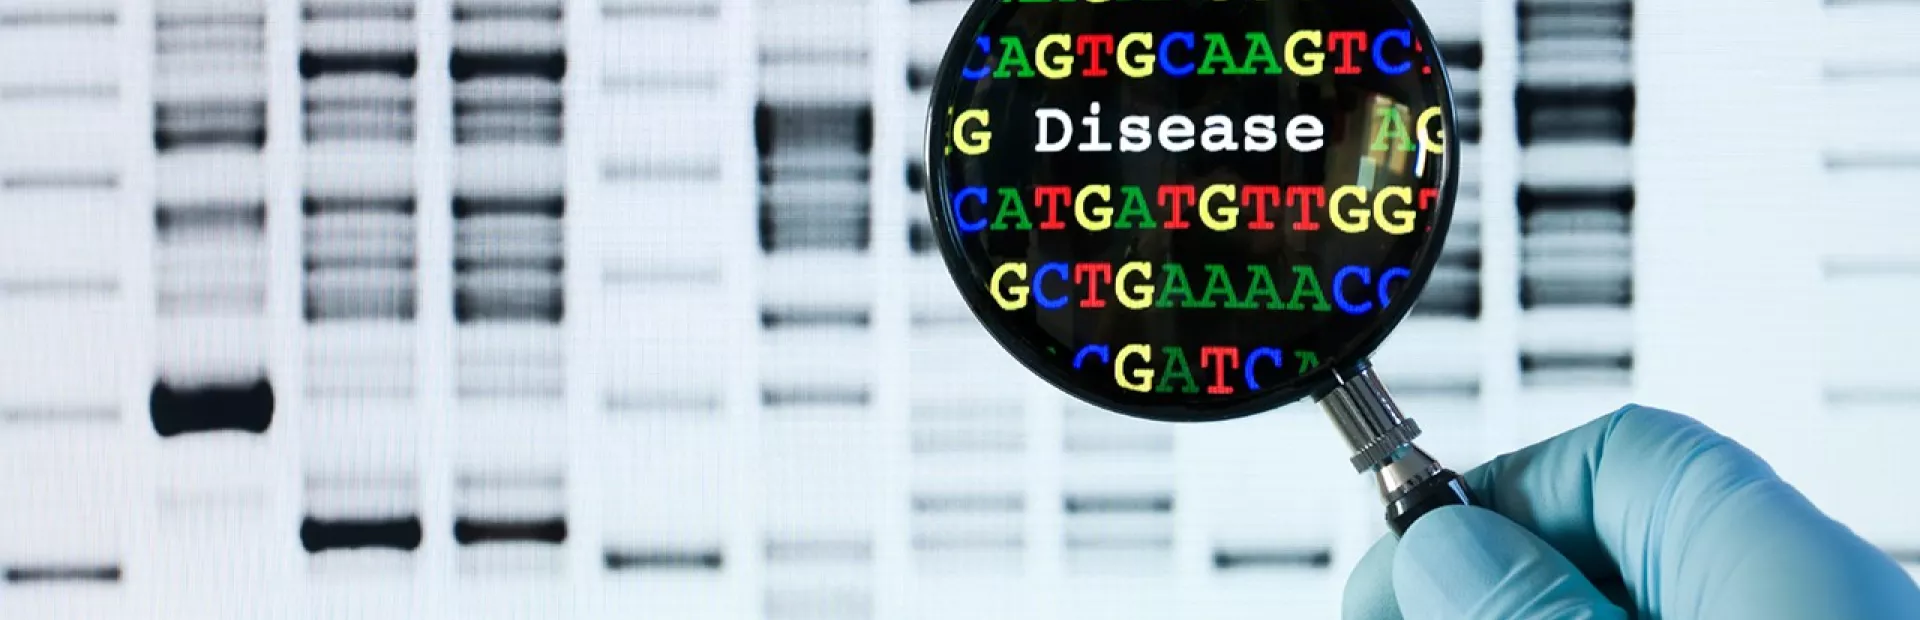 DNA sequencing image with magnifying glass highlighting the word Disease